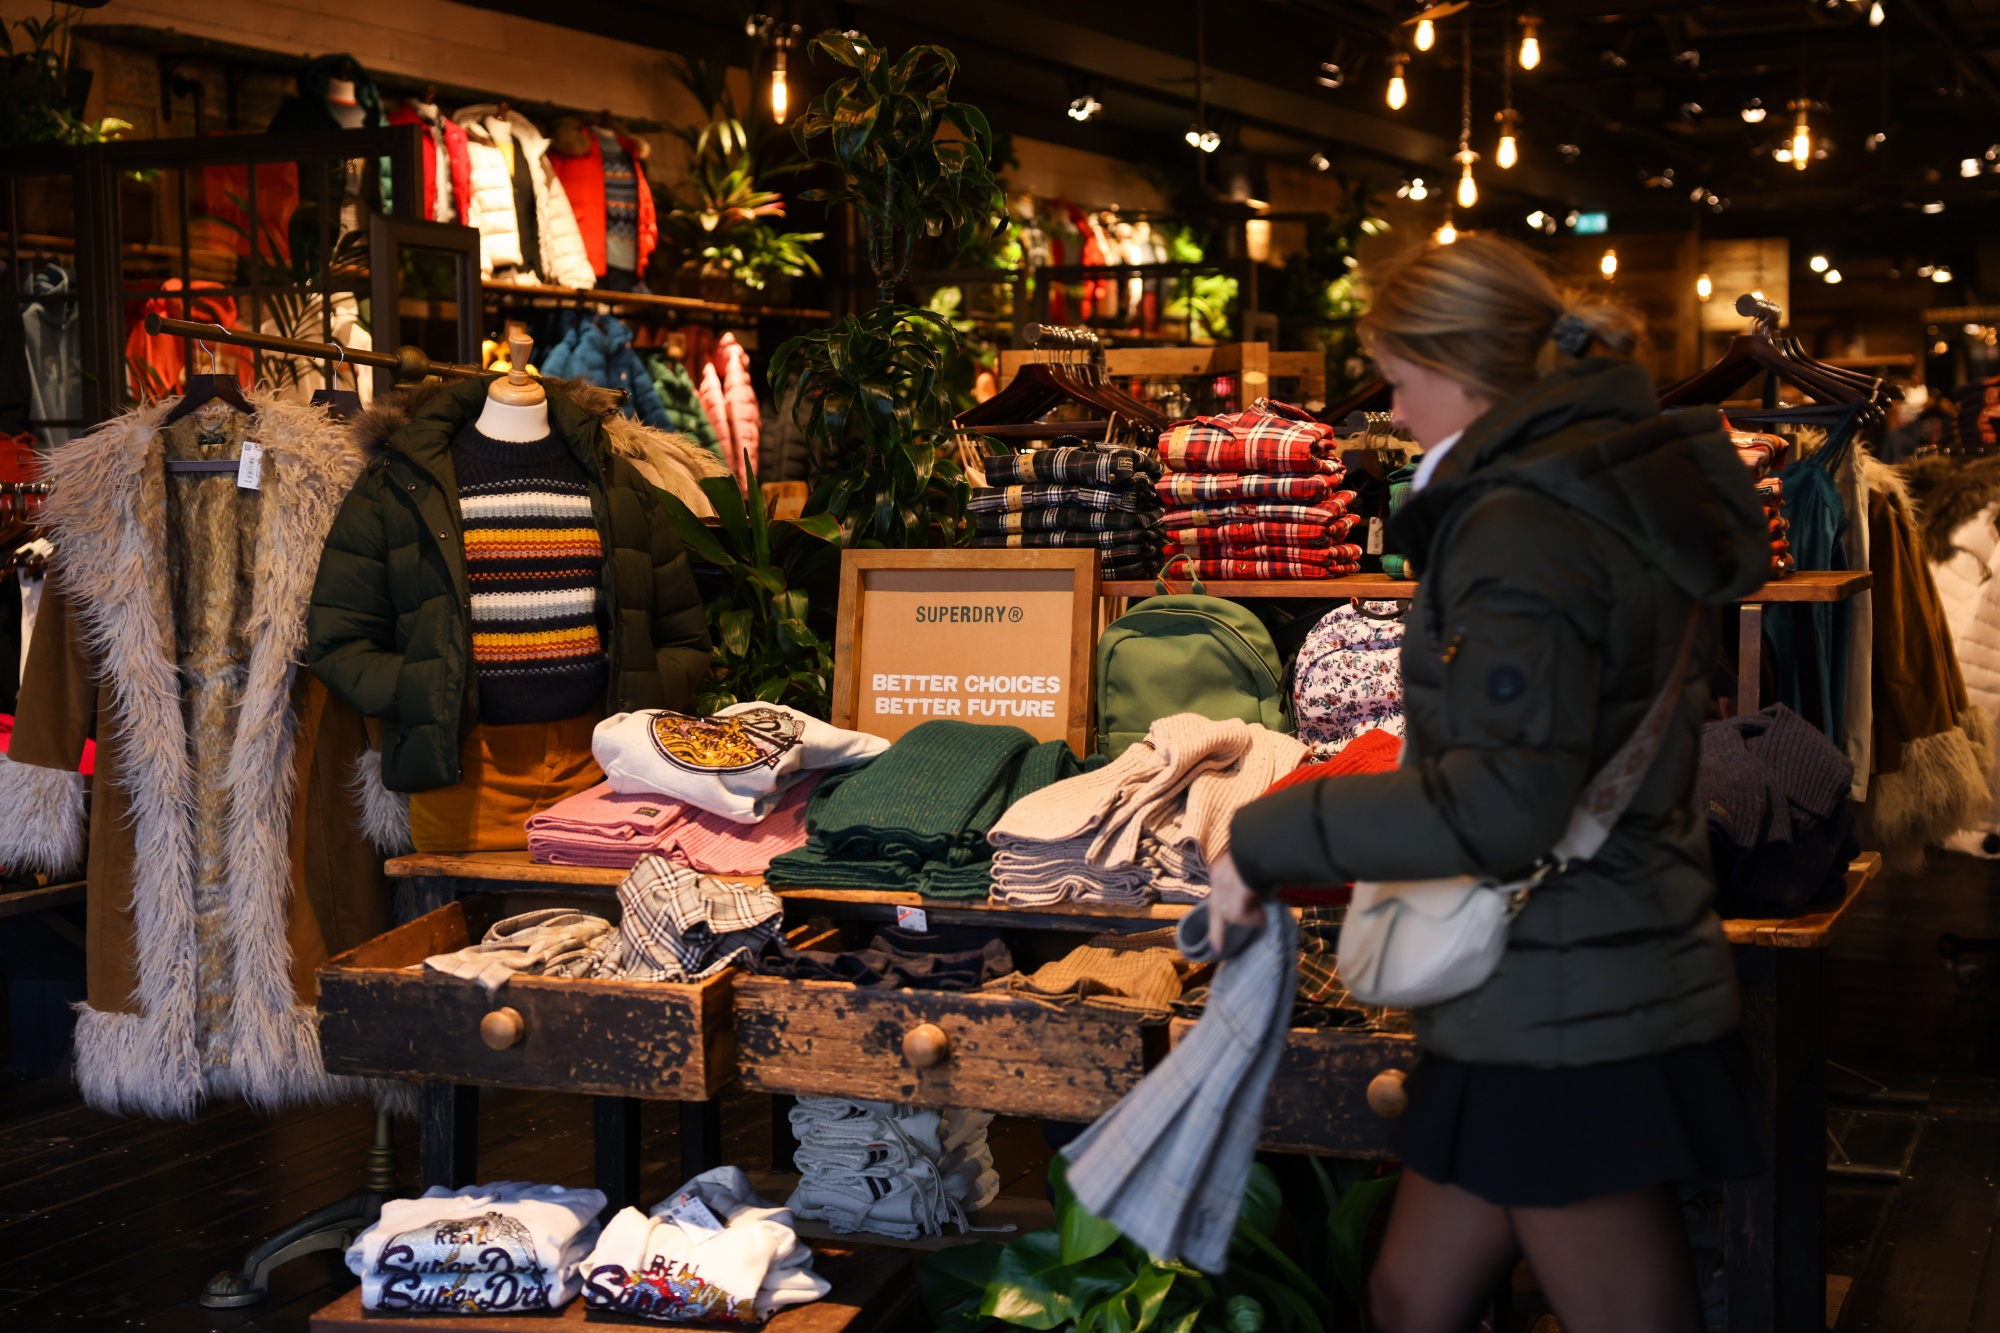 Superdry Losses Balloon as Retailer Struggles to Compete - Bloomberg